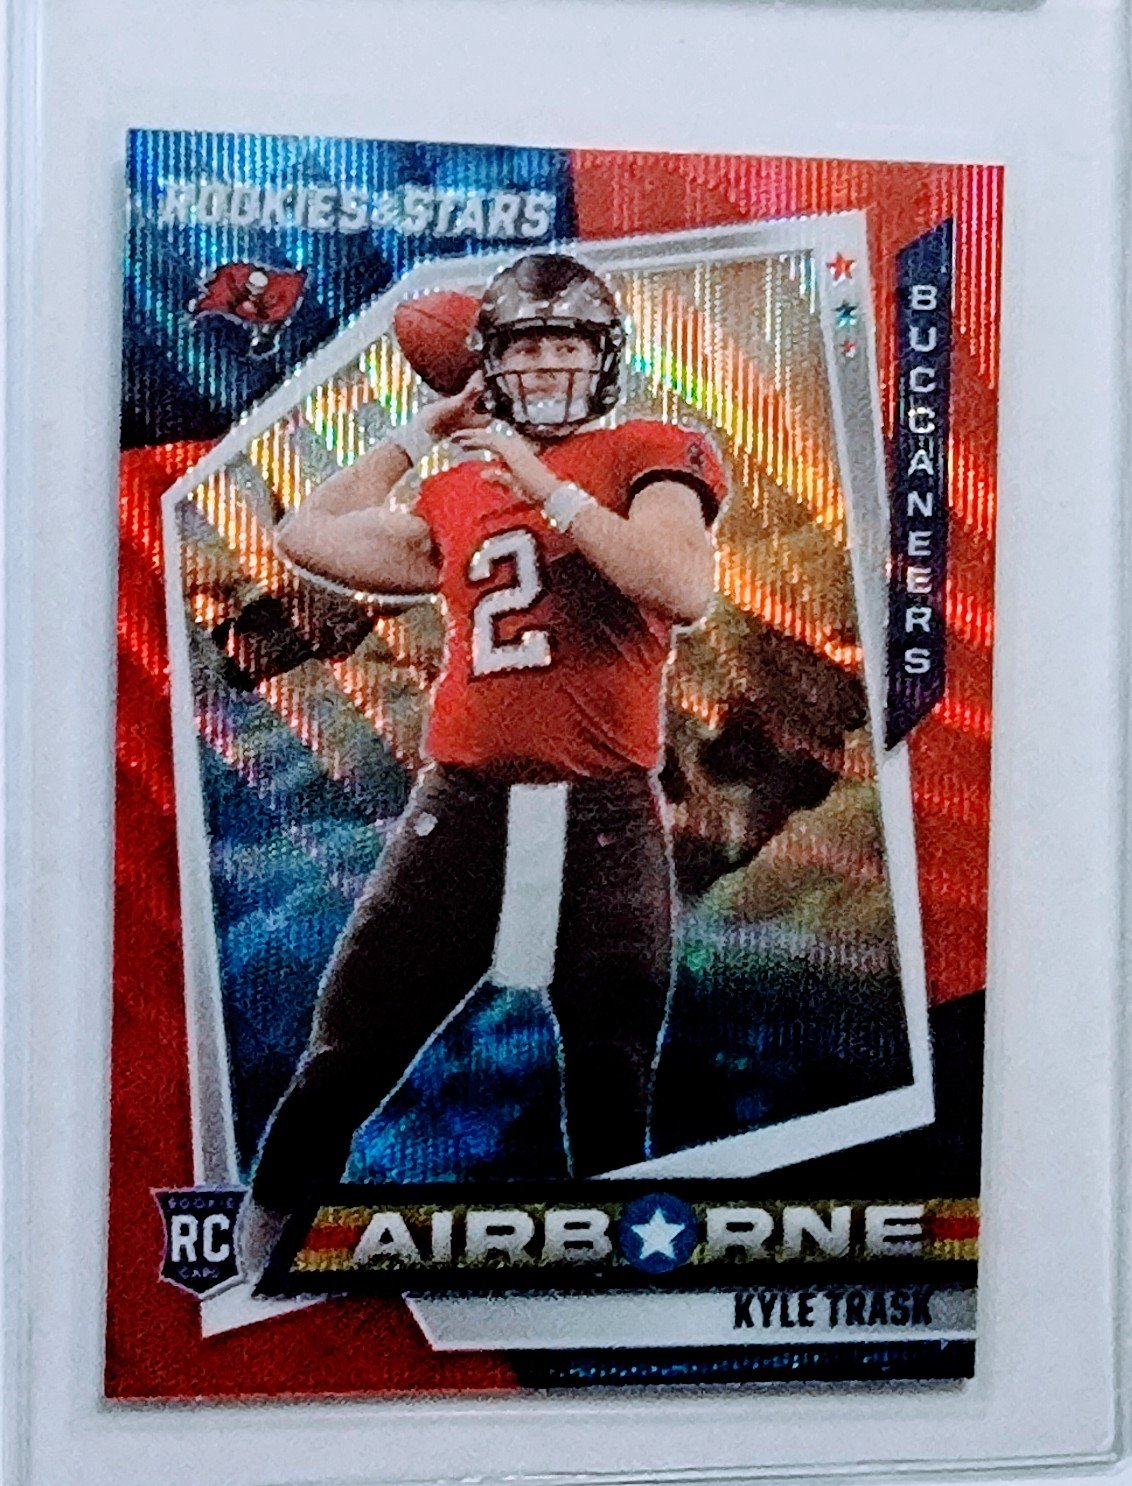 2021 Panini Rookies and Stars Kyle Trask Airborne Rookie Refractor Football Card AVM1 simple Xclusive Collectibles   